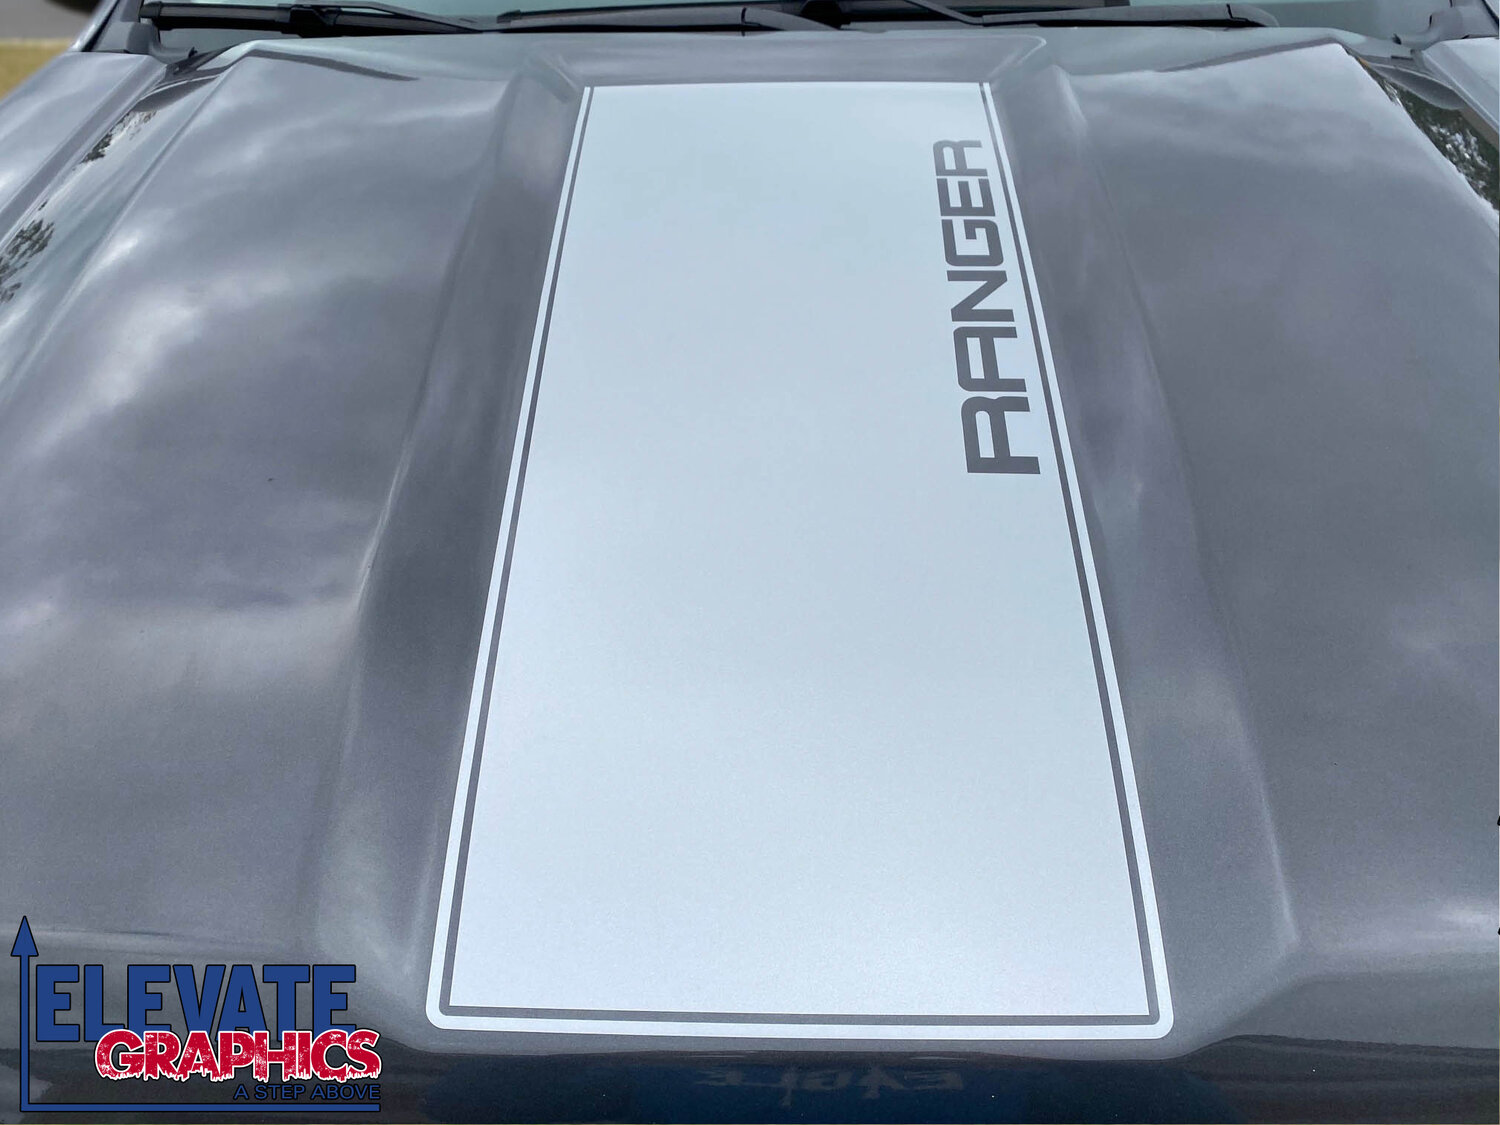  Elevate Graphics - Compatible with Ford Ranger Side Split  Graphics Vinyl Auto Stripes Decals and Stickers Years 2019-2023